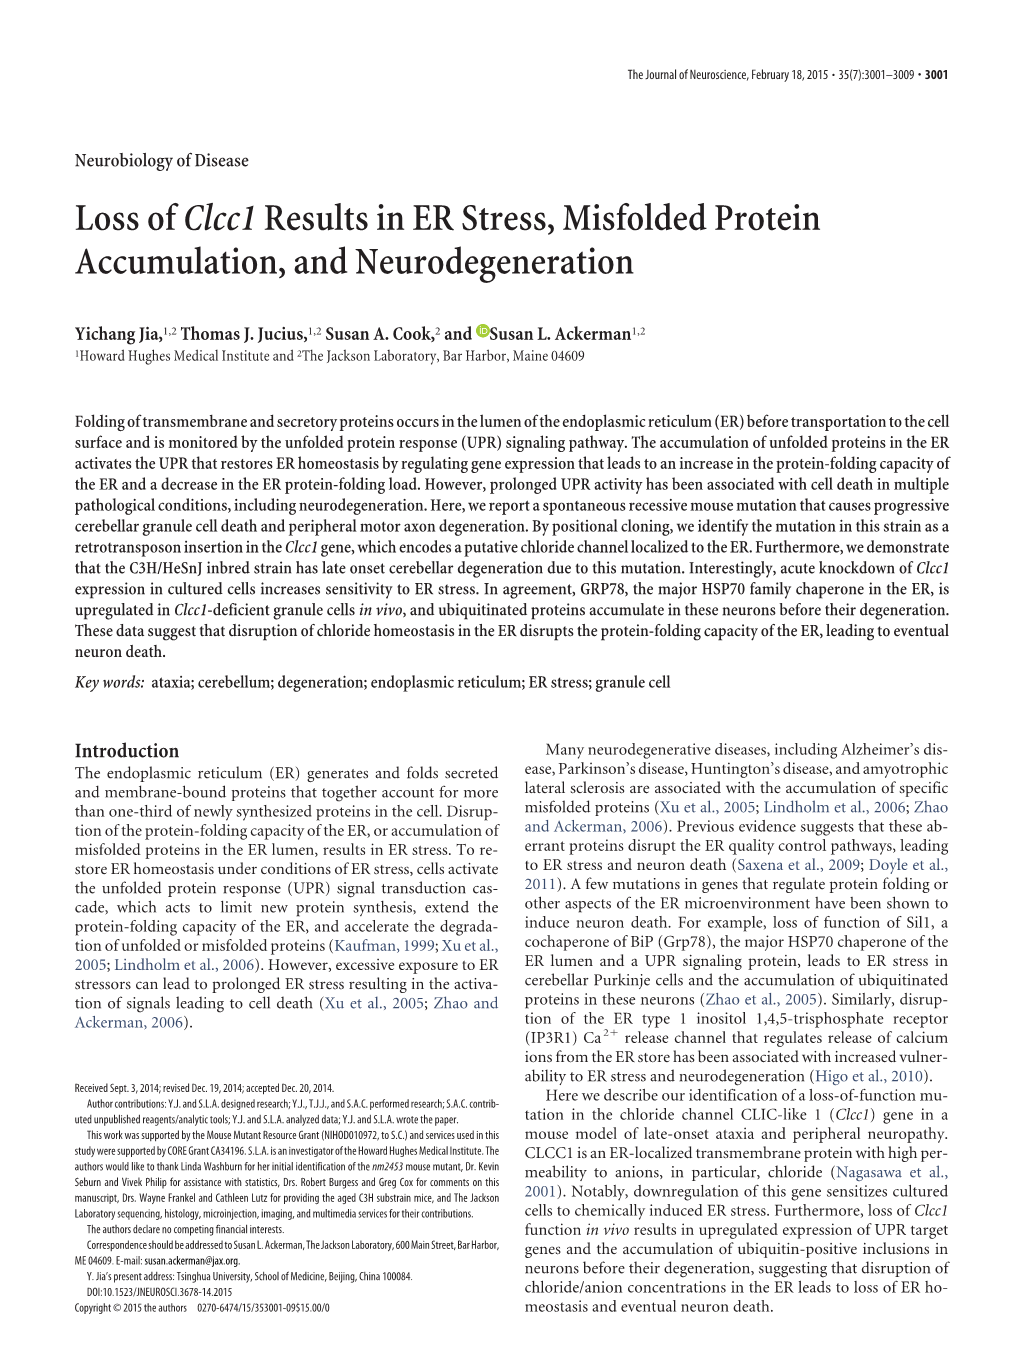 Loss Ofclcc1results in ER Stress, Misfolded Protein Accumulation